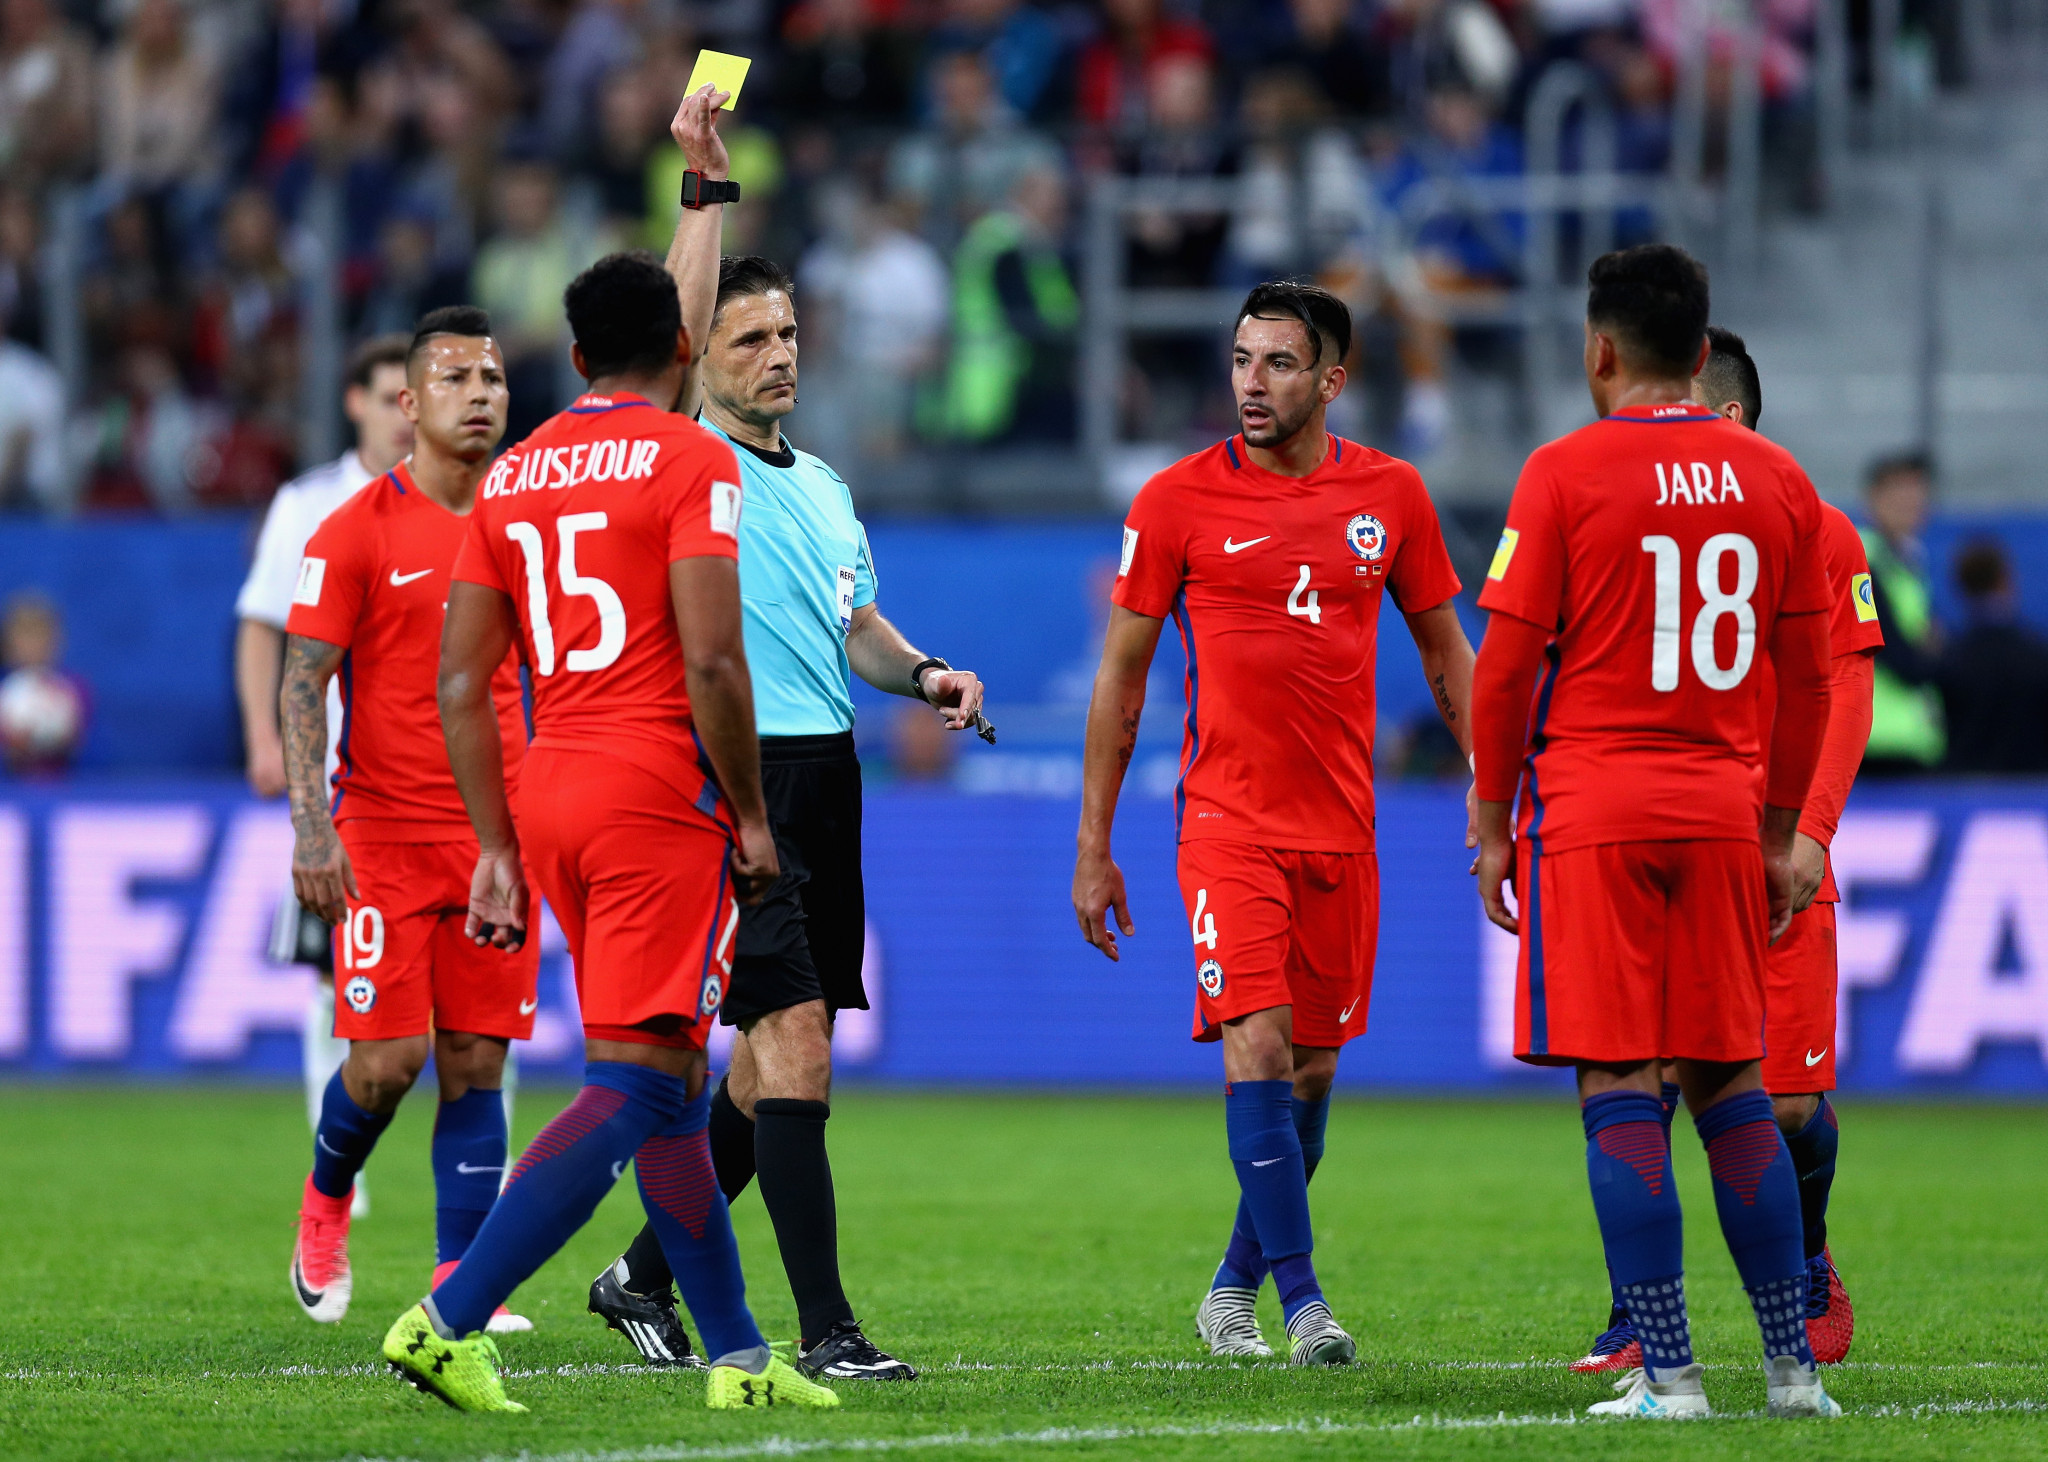 Many thought the VAR got it wrong when failing to give Gonzala Jara a red card during the Confederations Cup final against Germany ©Getty Images